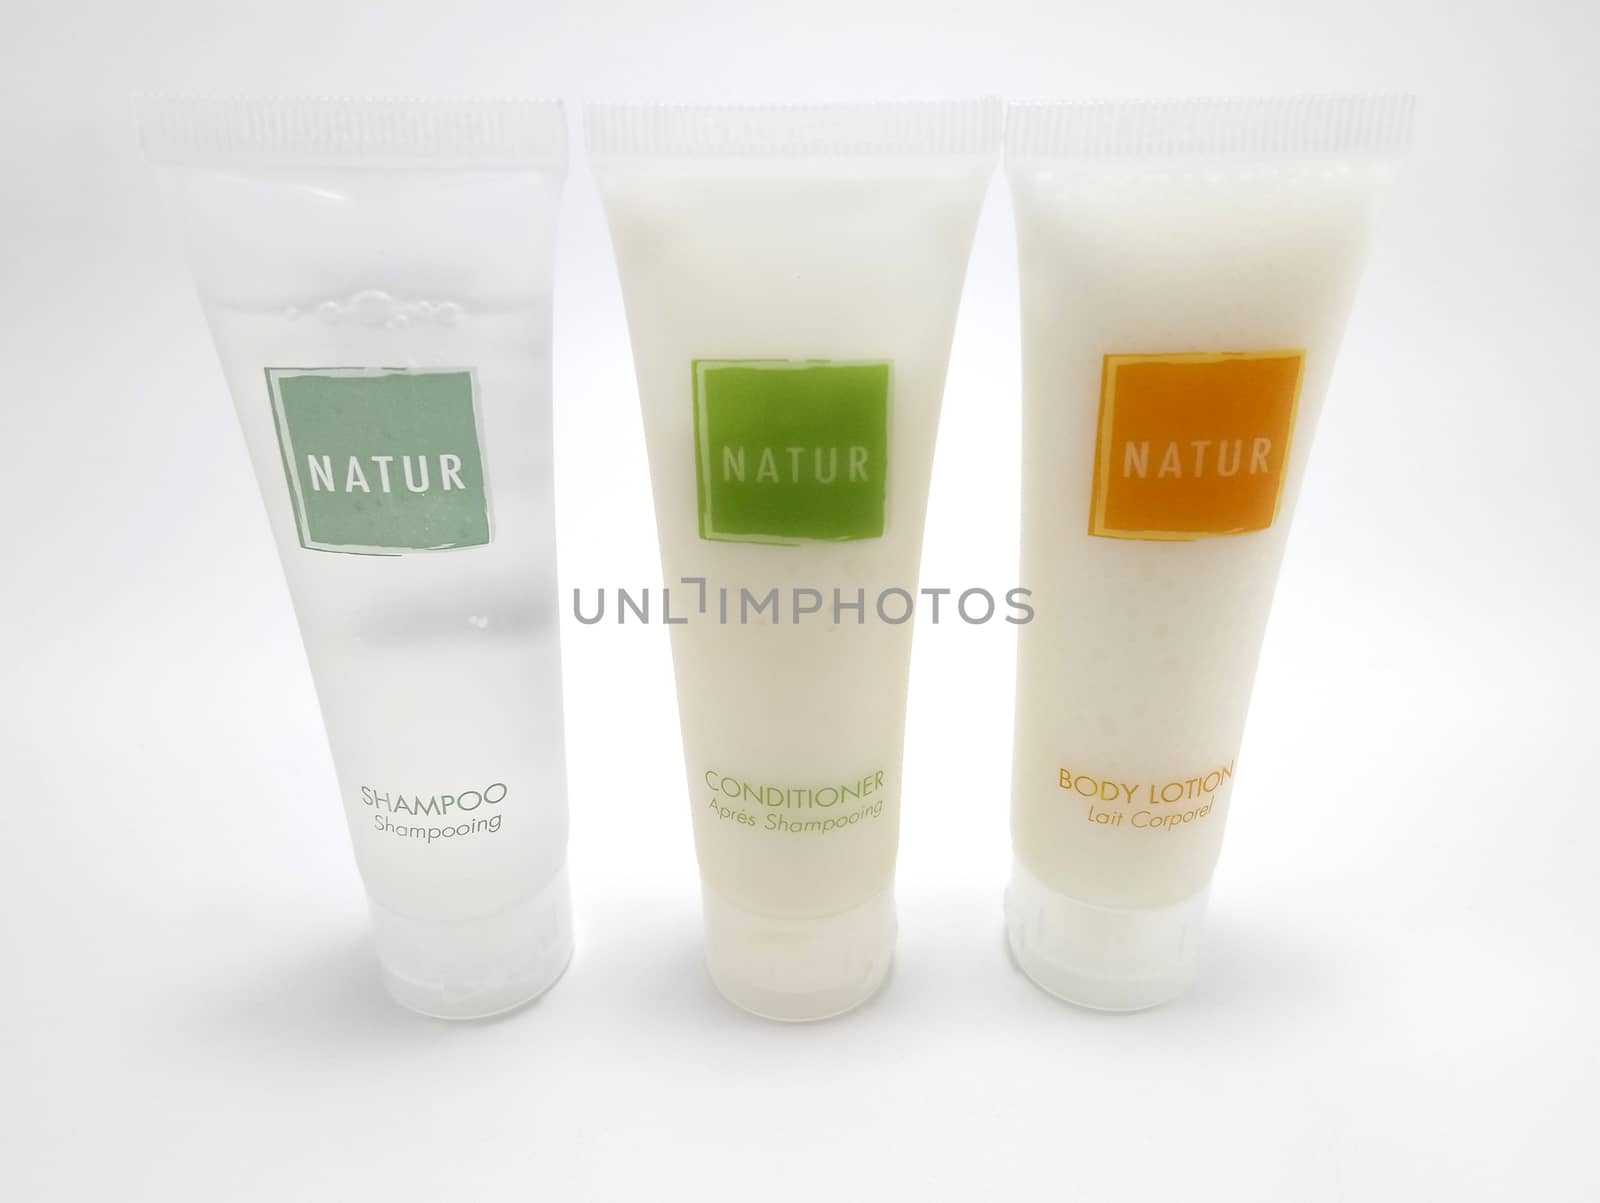 Natur various products in Manila, Philippines by imwaltersy